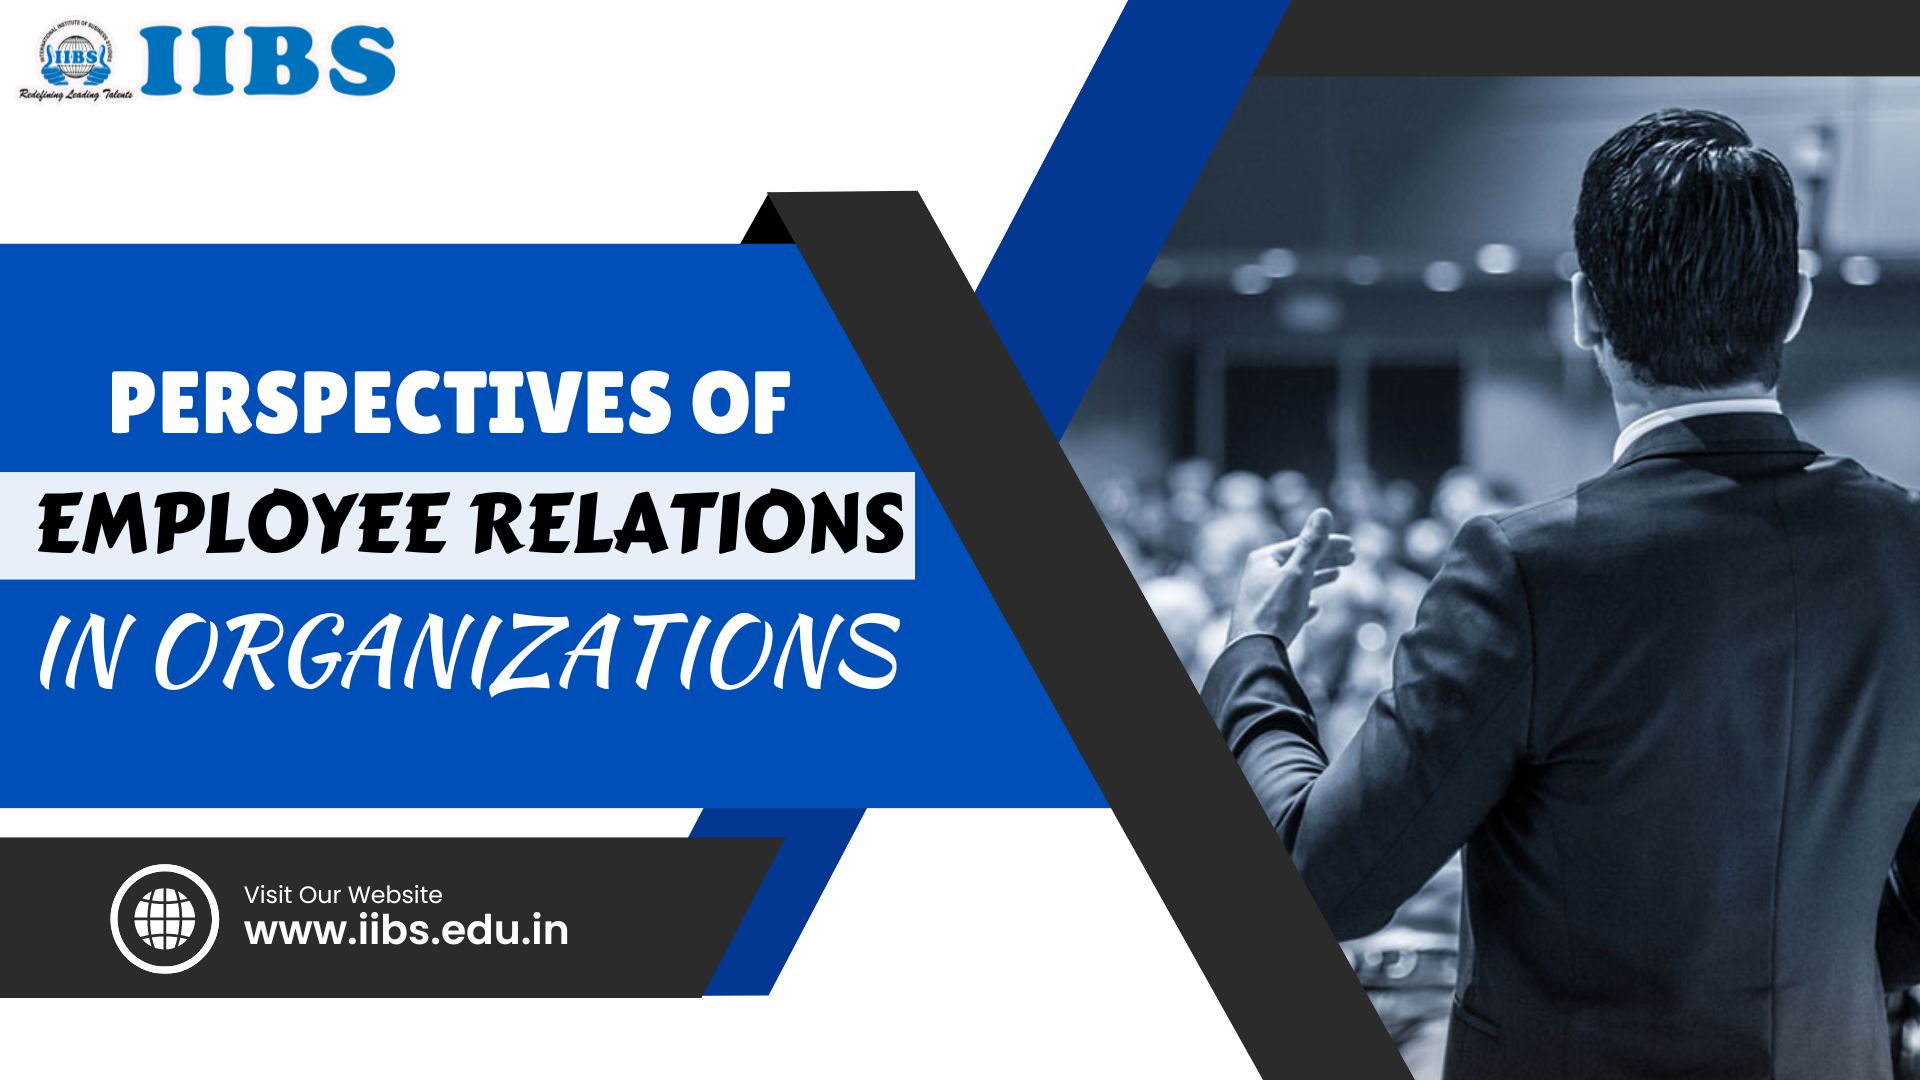 Perspectives of Employee Relations in Organizations